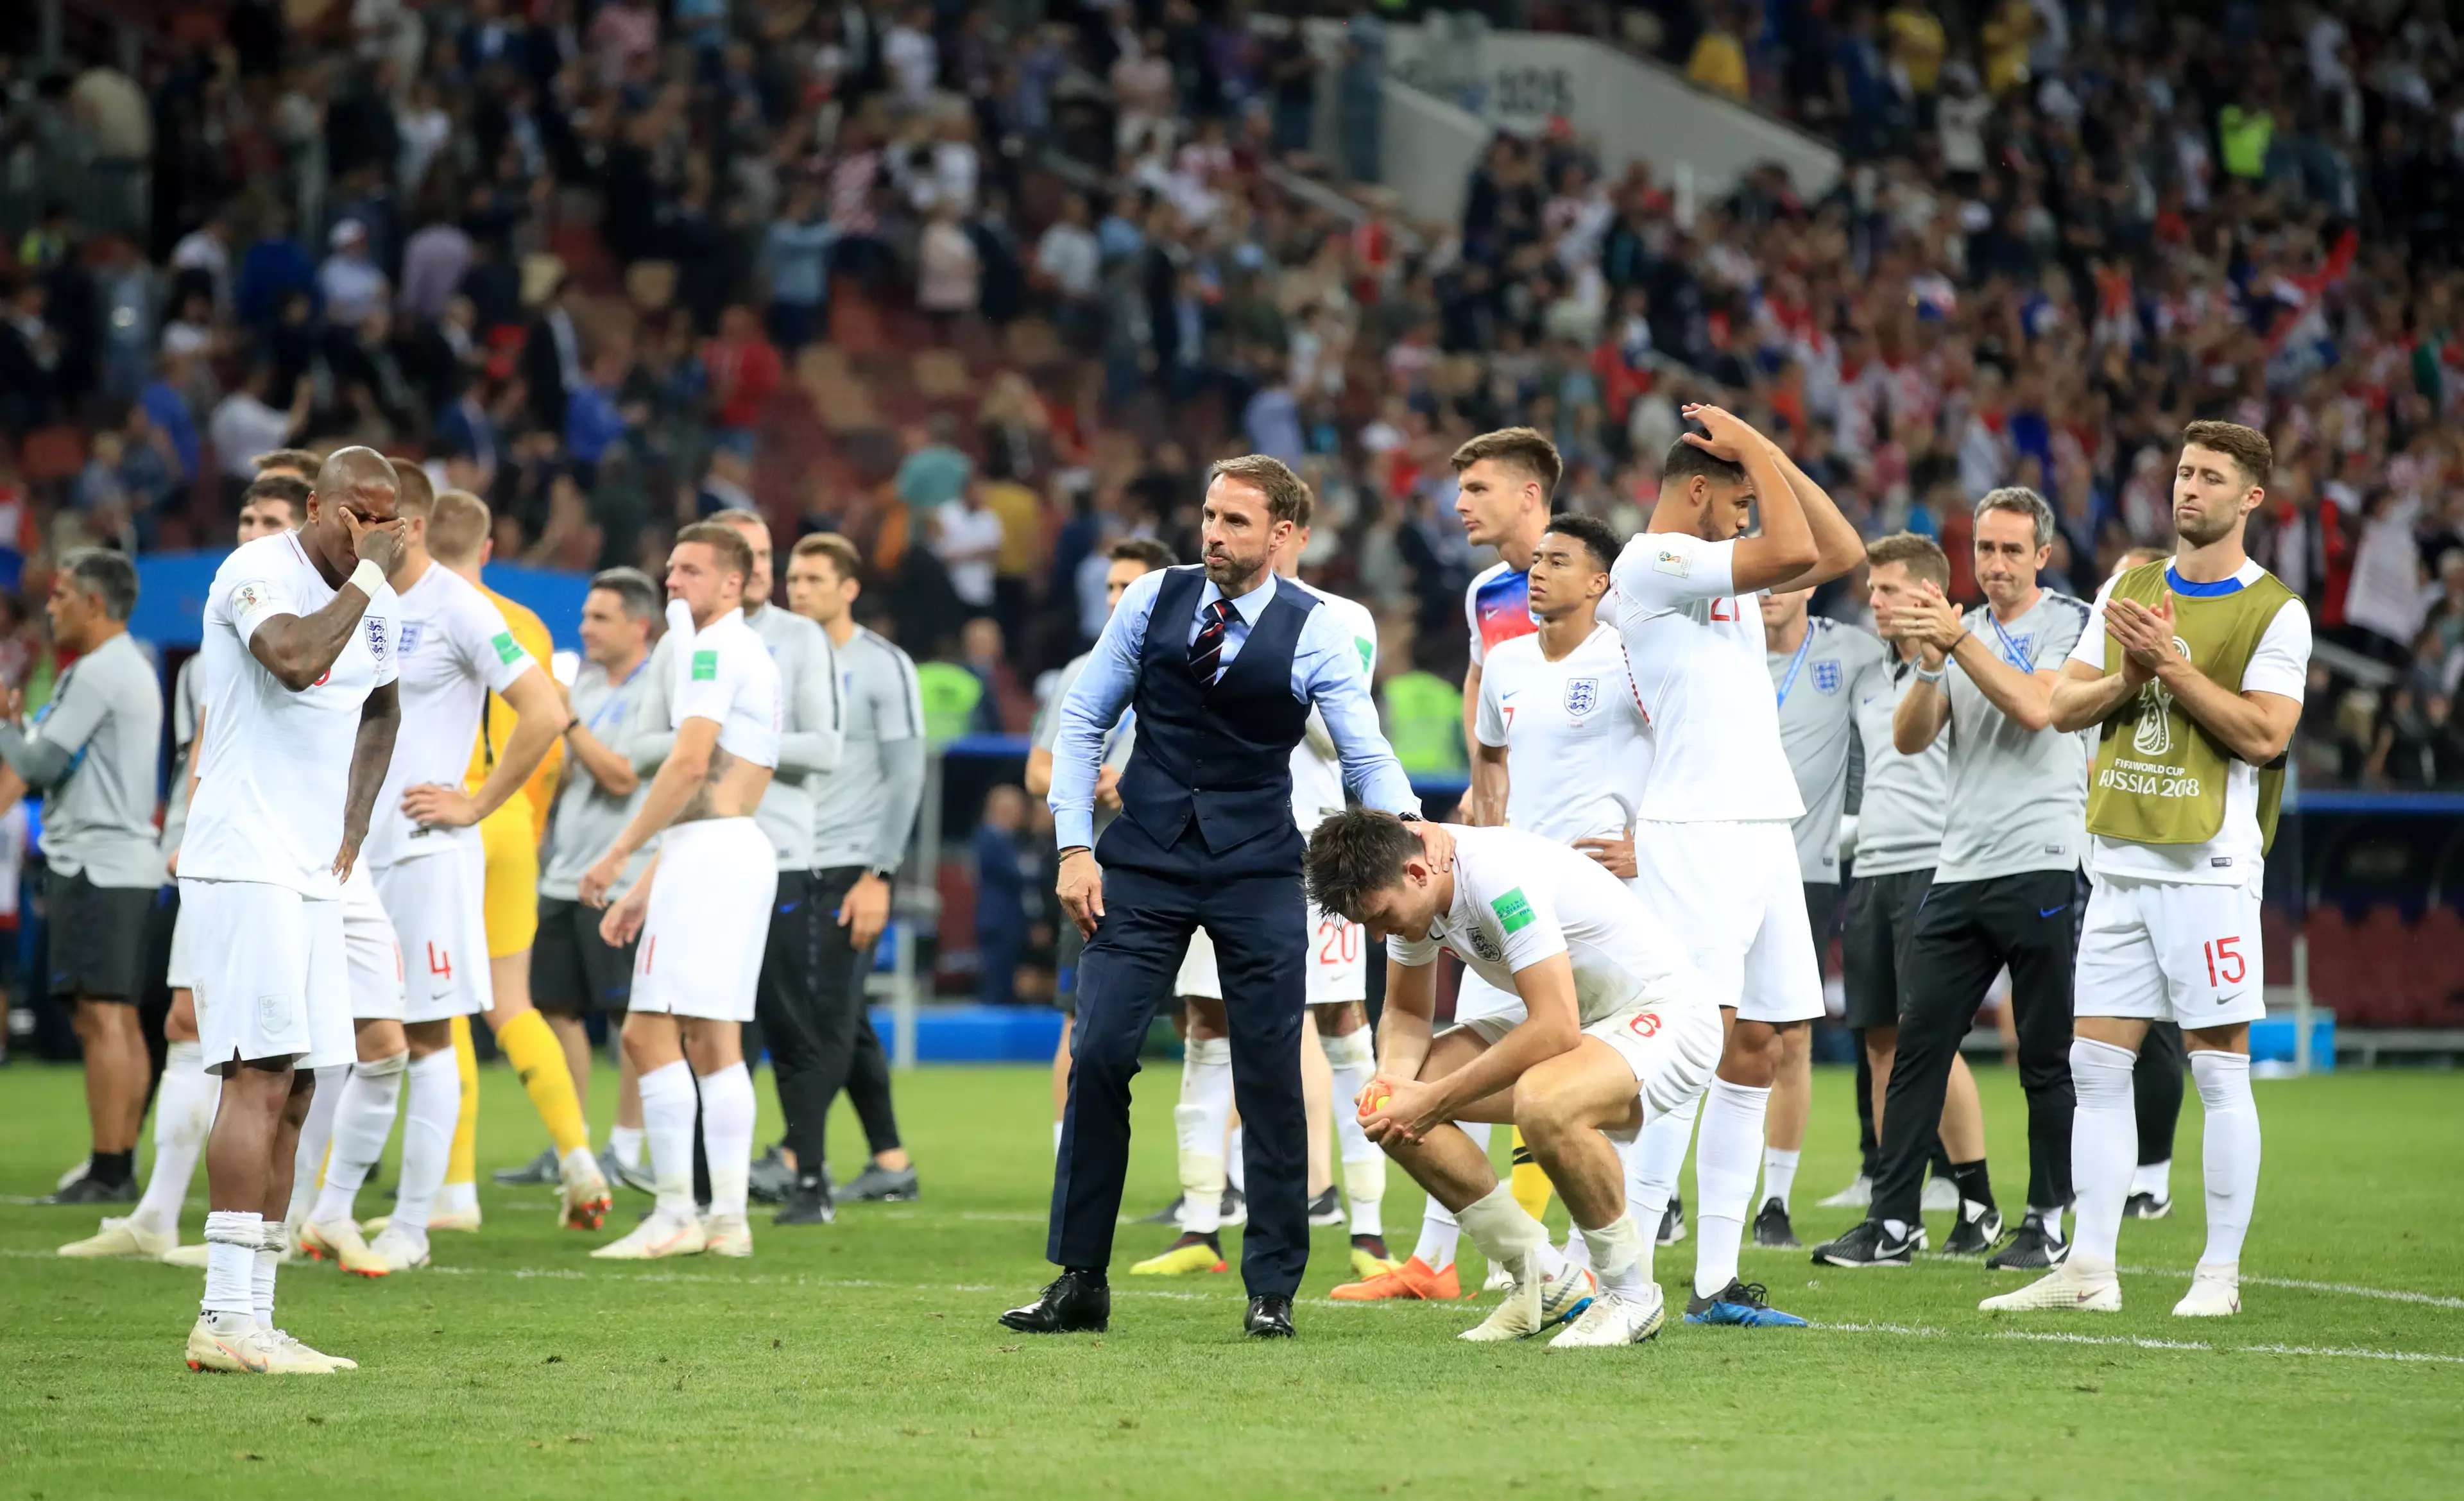 England players gutted after losing to Croatia. Image: PA Images